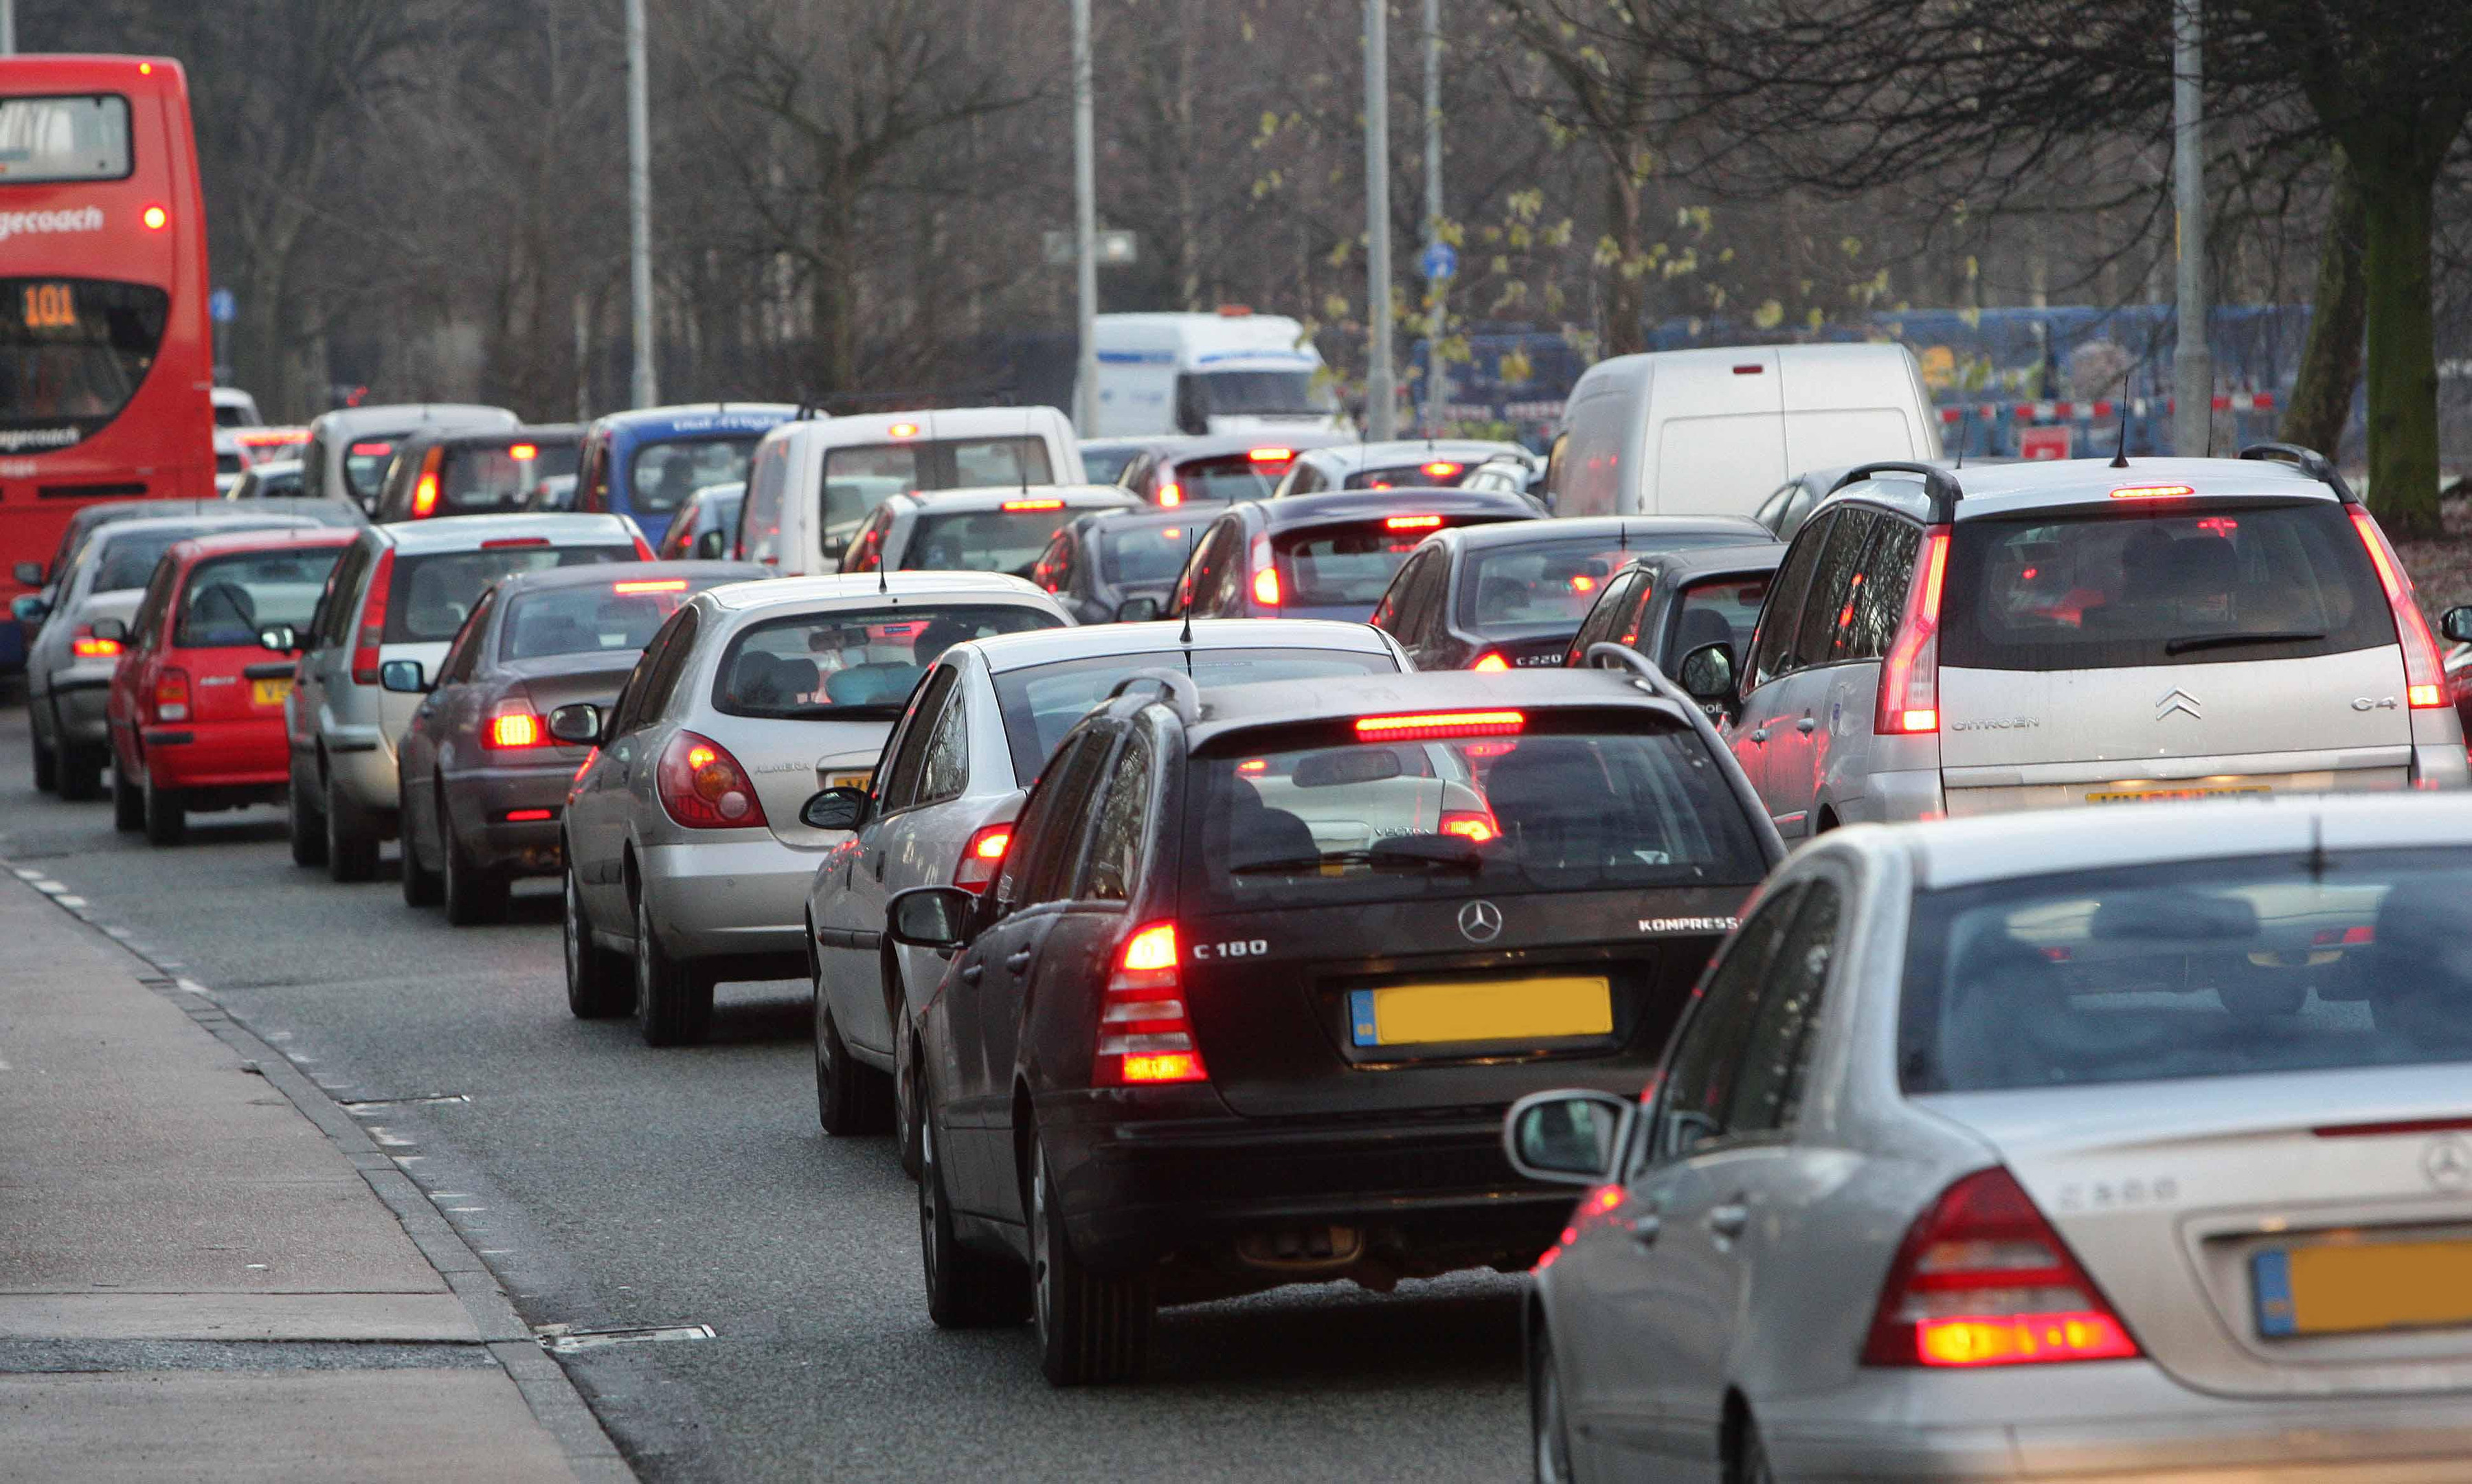 Politicians have been urged to tackle congestion and improve air quality.